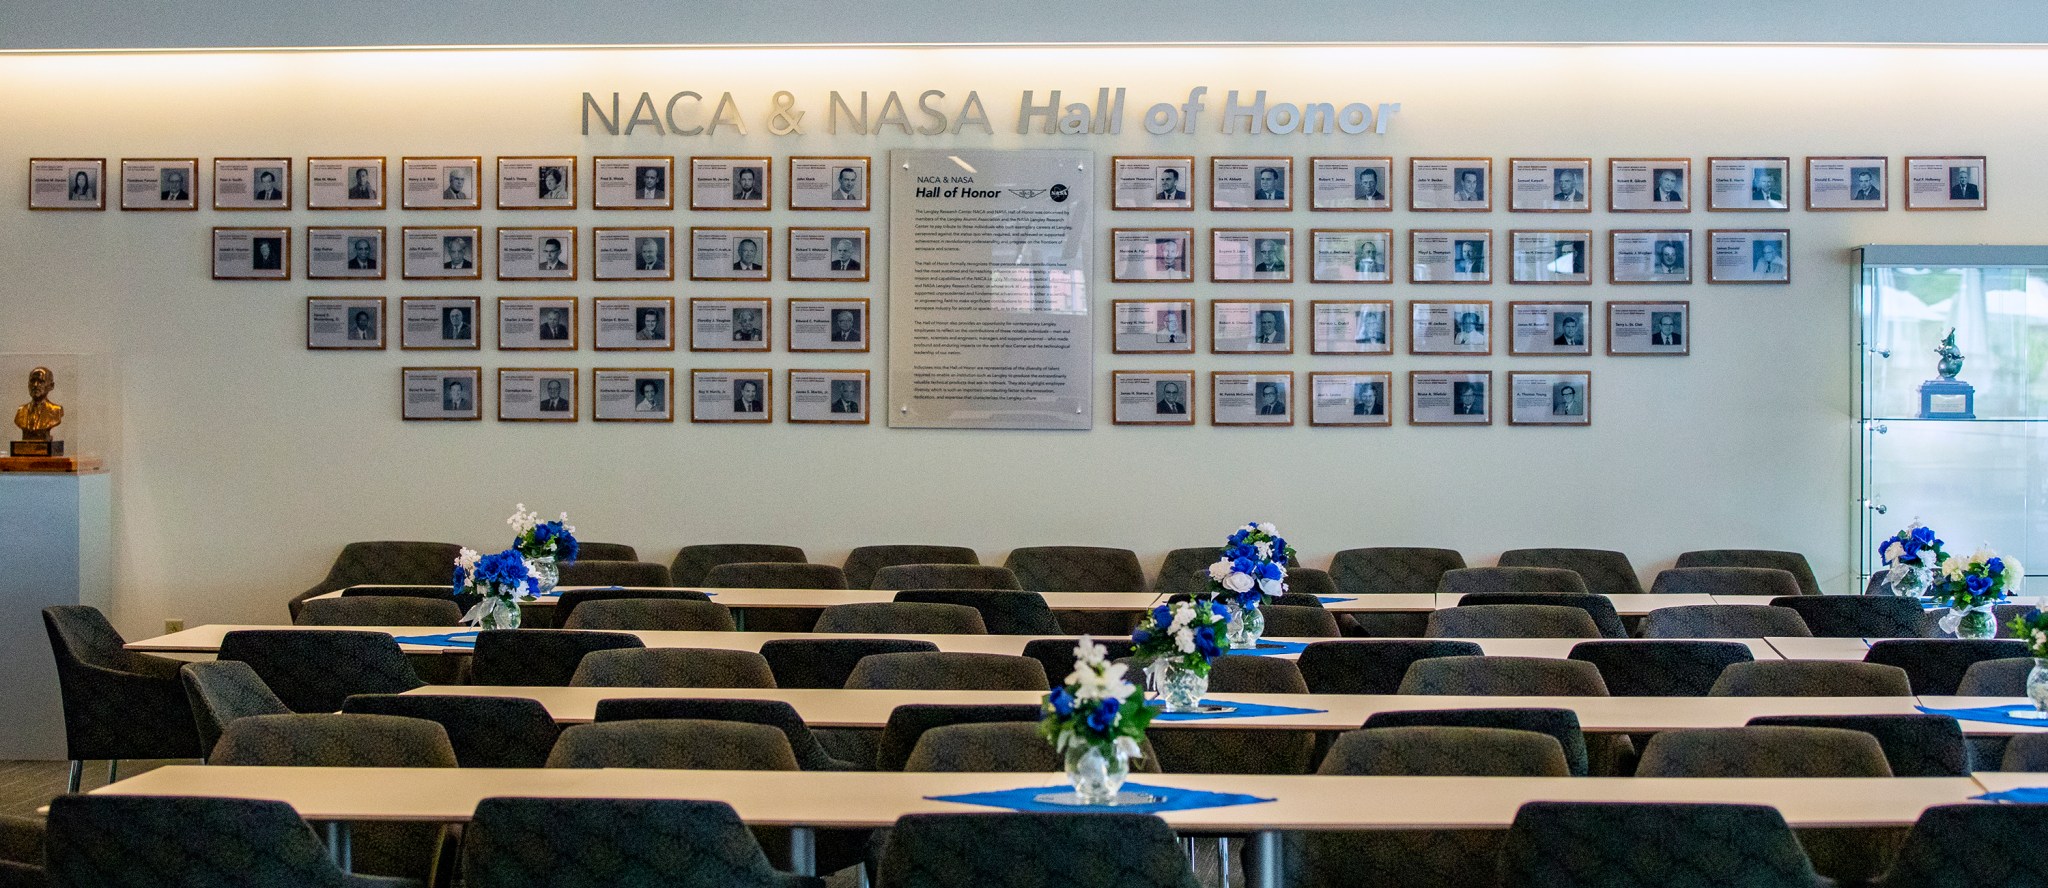 The Hall of Honor was conceived by members of the Langley Alumni Association and NASA Langley as a way to pay tribute to individuals who built exemplary careers at Langley.